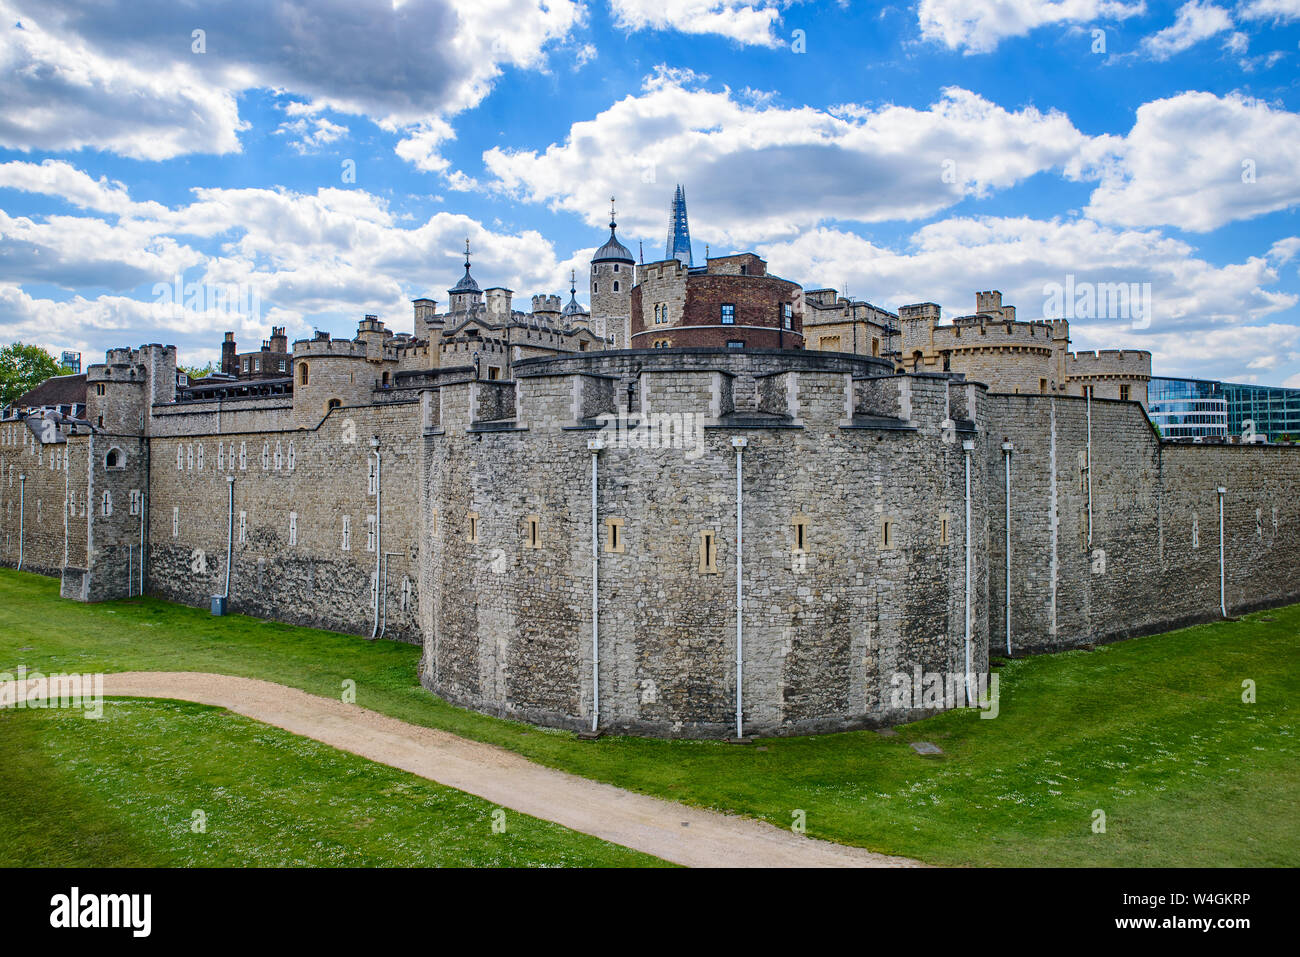 The Tower of London on the north bank of the River Thames in London, United Kingdom Stock Photo